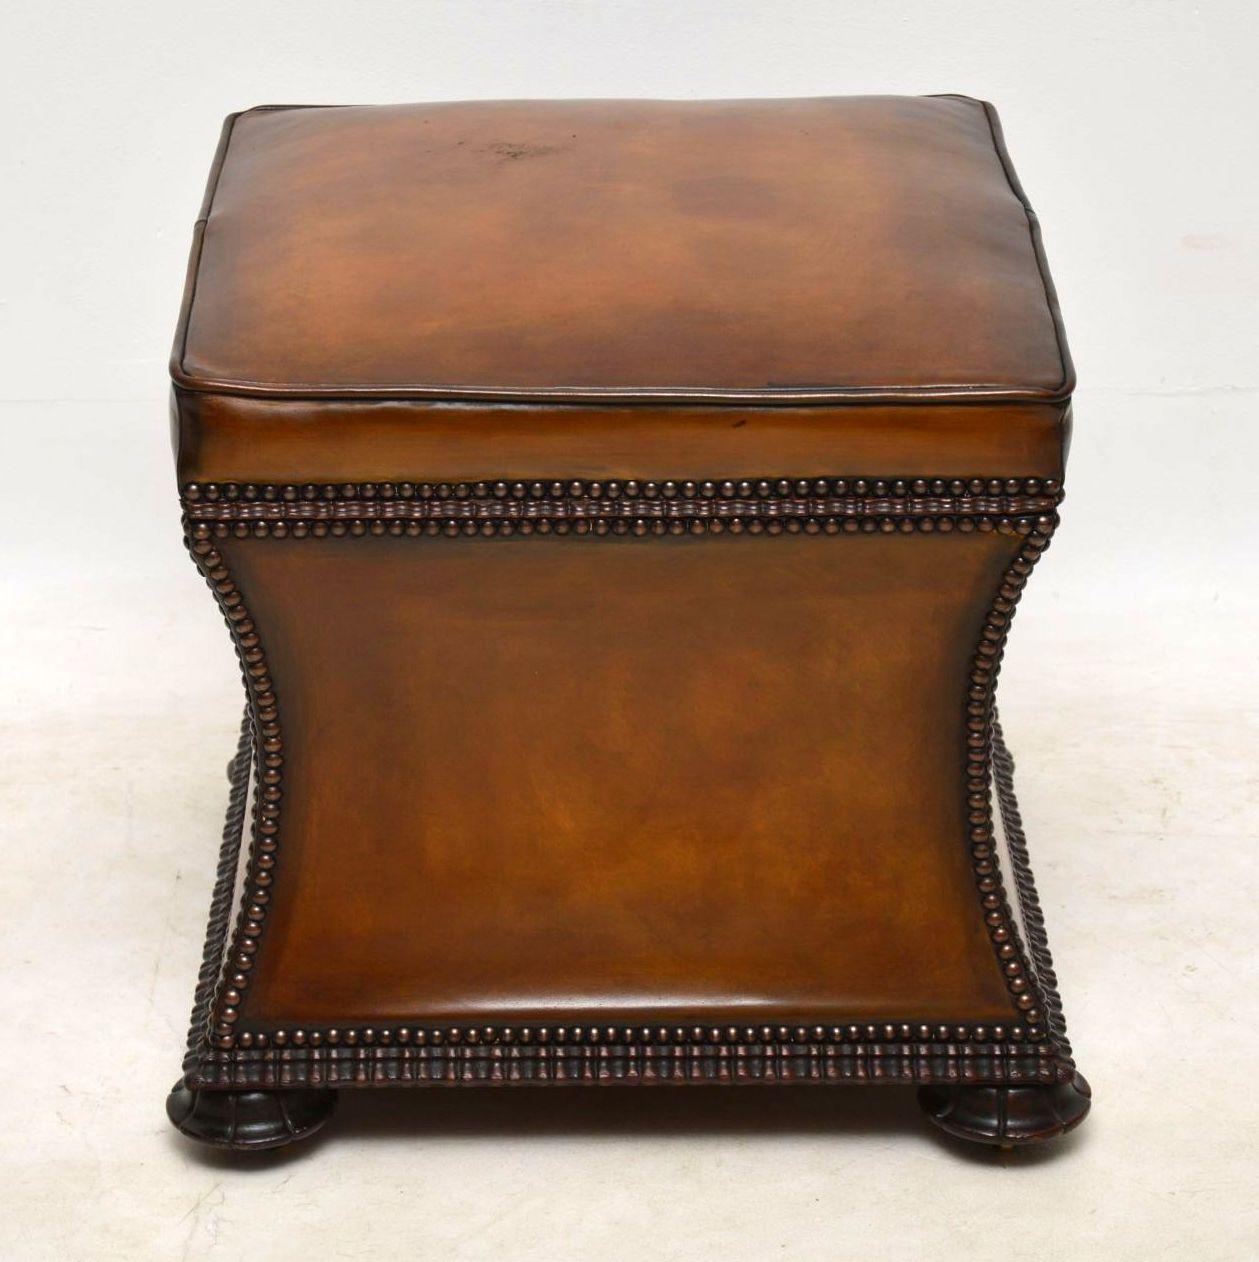 Antique William IV leather upholstered ottoman with useful storage inside. It has a padded seat, concave sides and a hinged seat that lifts up to reveal a newly upholstered interior. The leather is hand colored showing loads of character and it’s